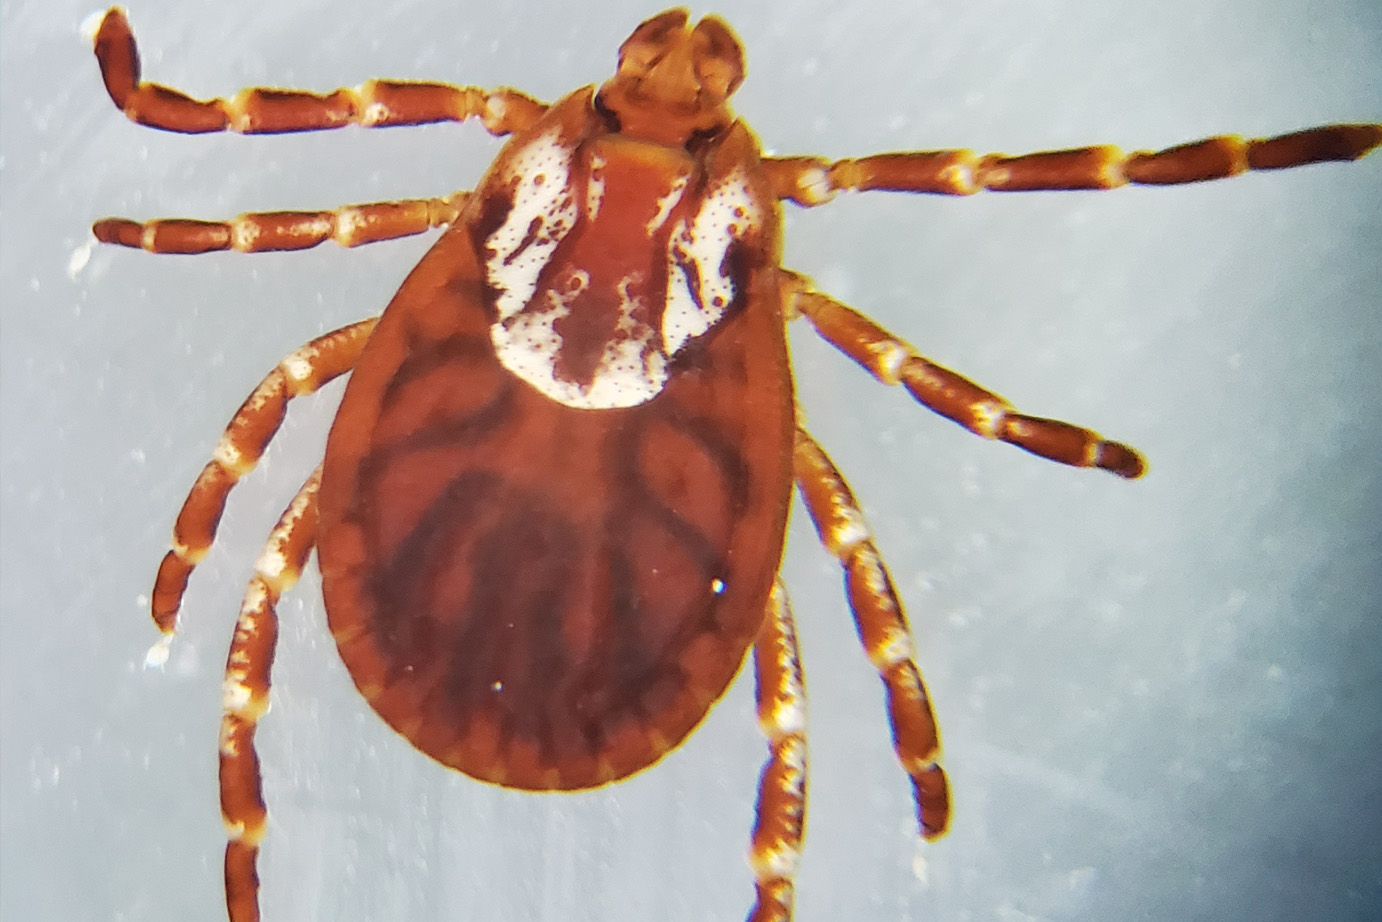 An American Dog Tick, the most commonly found tick in North America and a vector for diseases like Rocky Mountain Spotted Fever and Tularemia. Image owned by the Smith lab.